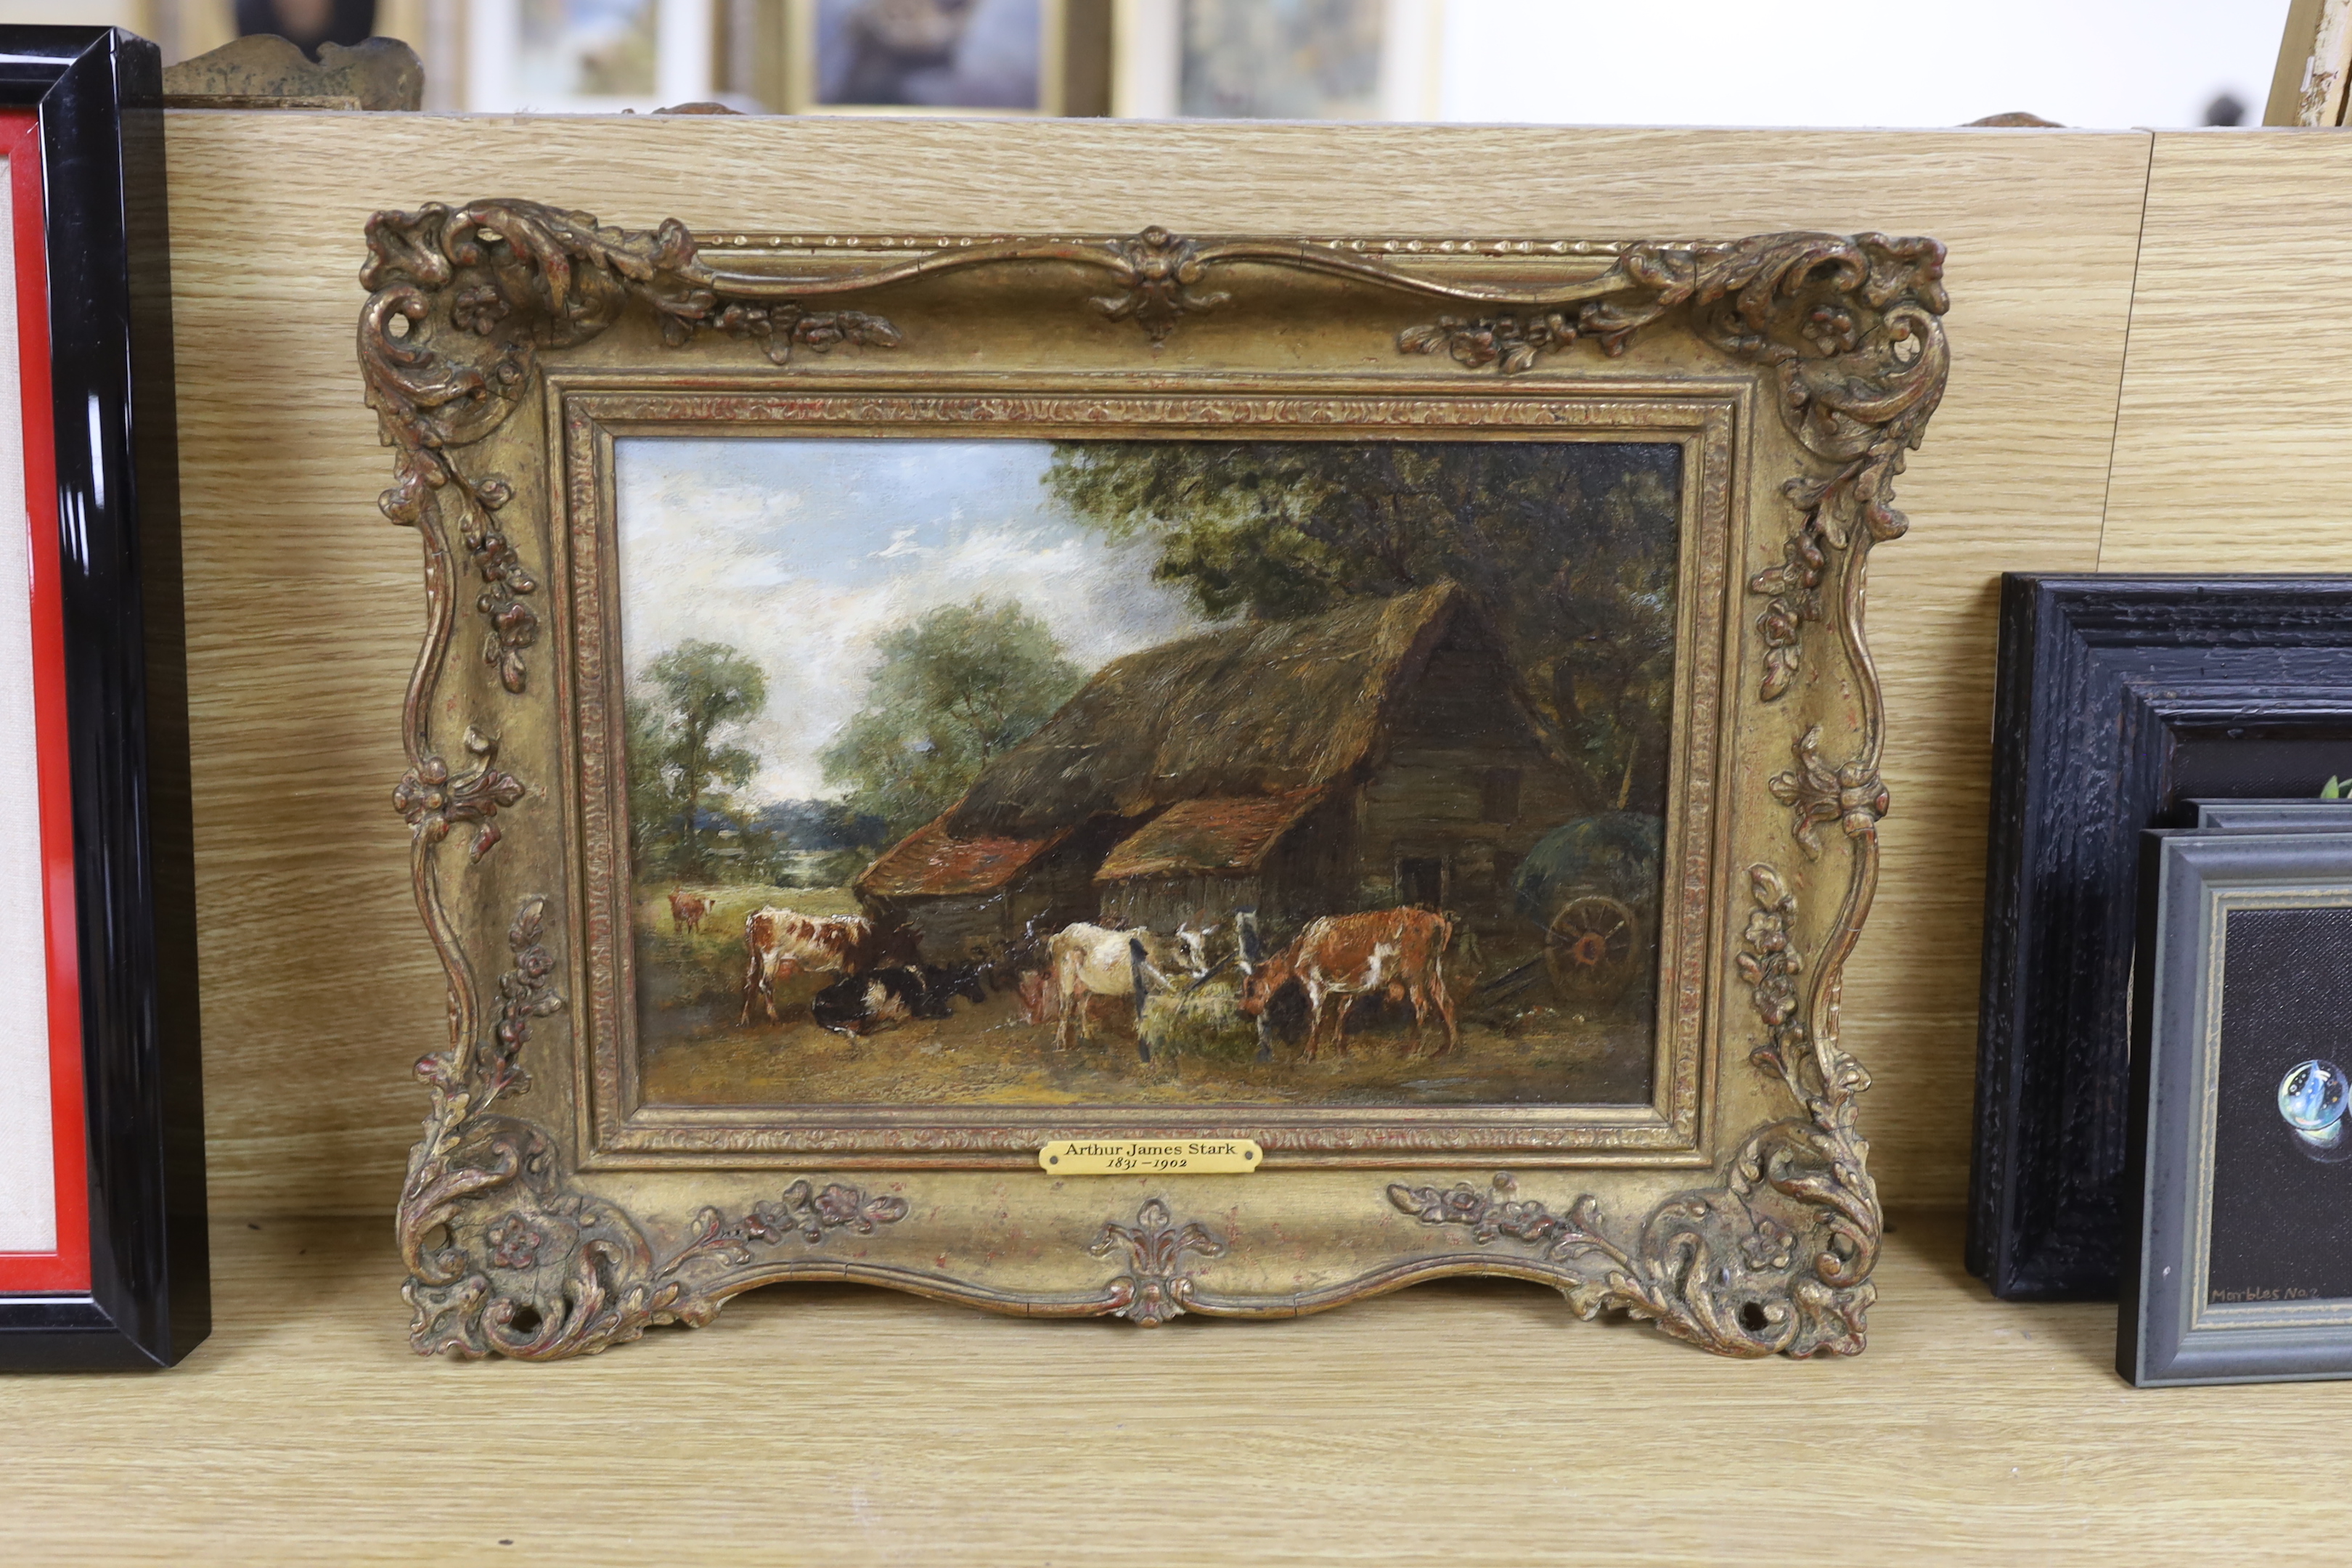 Arthur James Stark (1831-1902), oil on canvas, Farmyard scene with cattle grazing, unsigned, applied plaque to the frame, 19 x 29cm